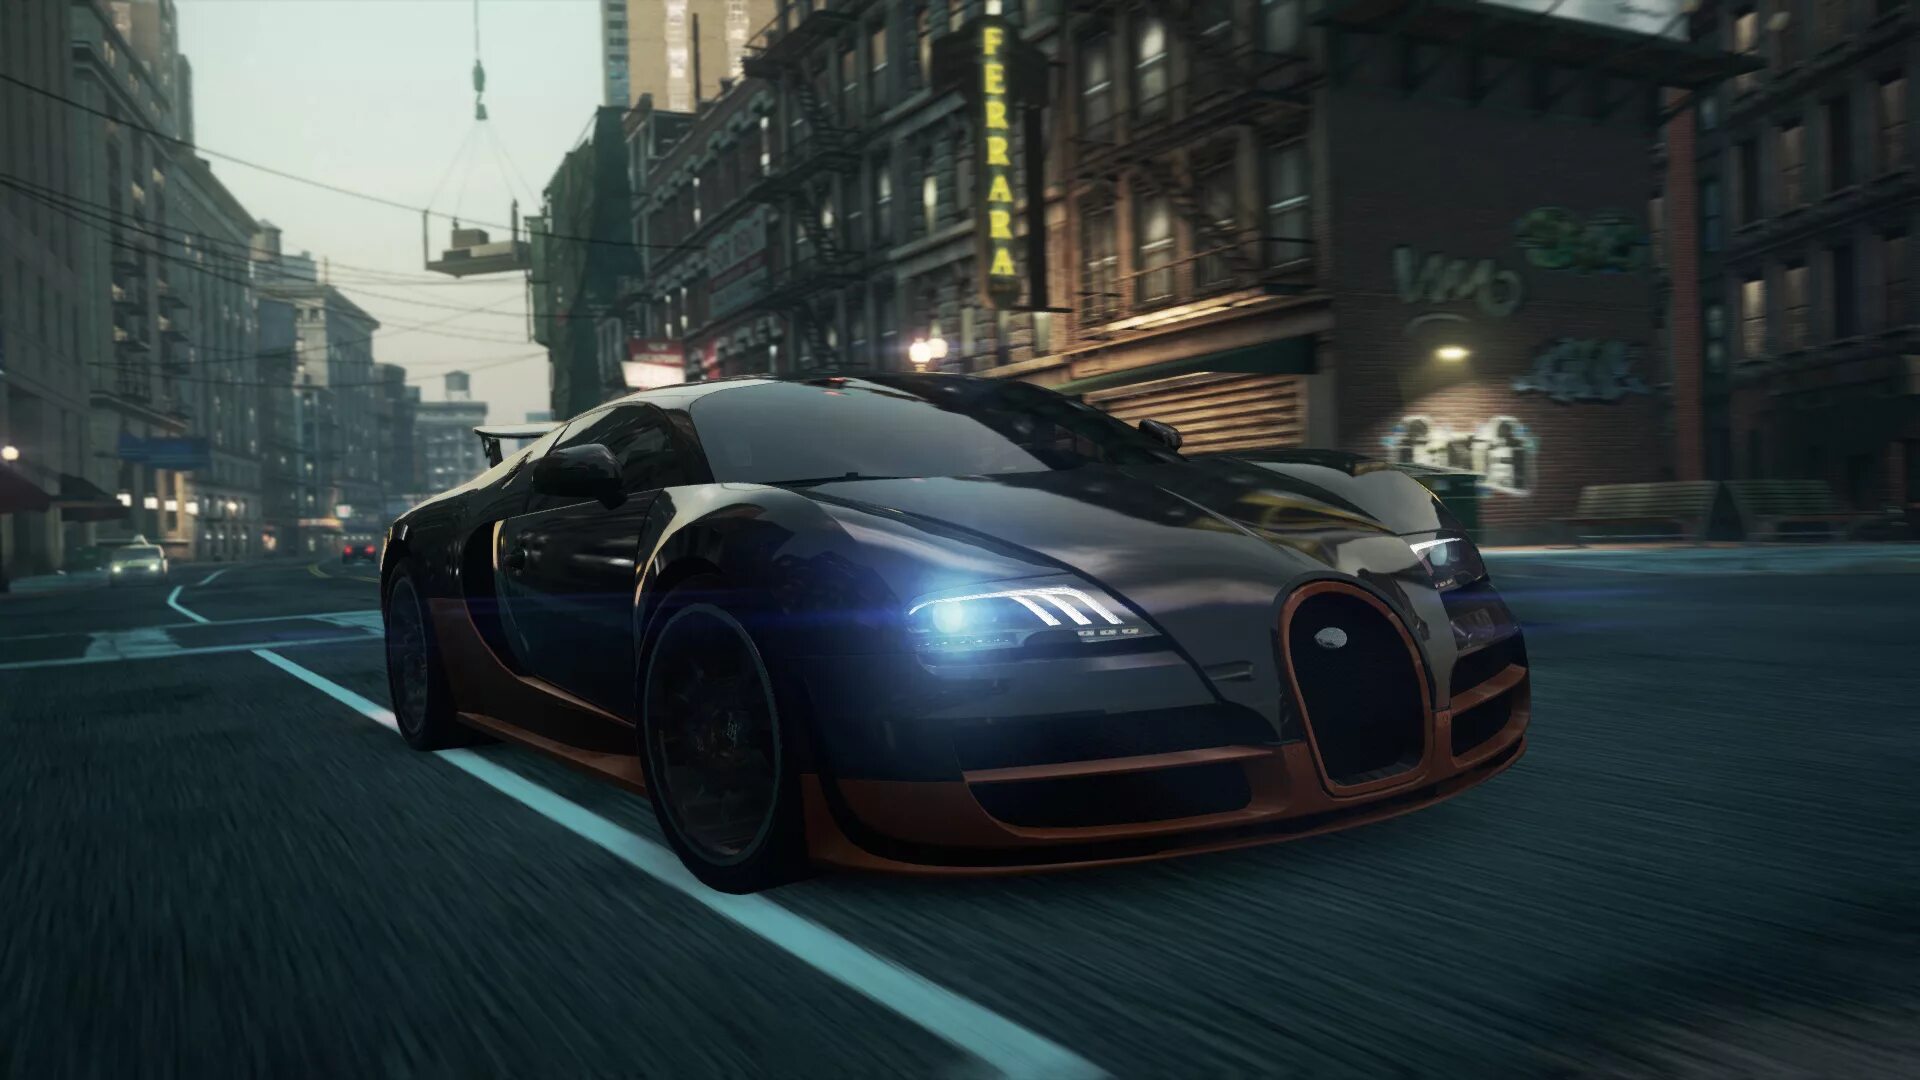 Need download. Need for Speed most wanted 2012. Нфс most wanted 2012. NFS most wanted 2012 Bugatti Veyron. NFS most wanted 2012 Бугатти.